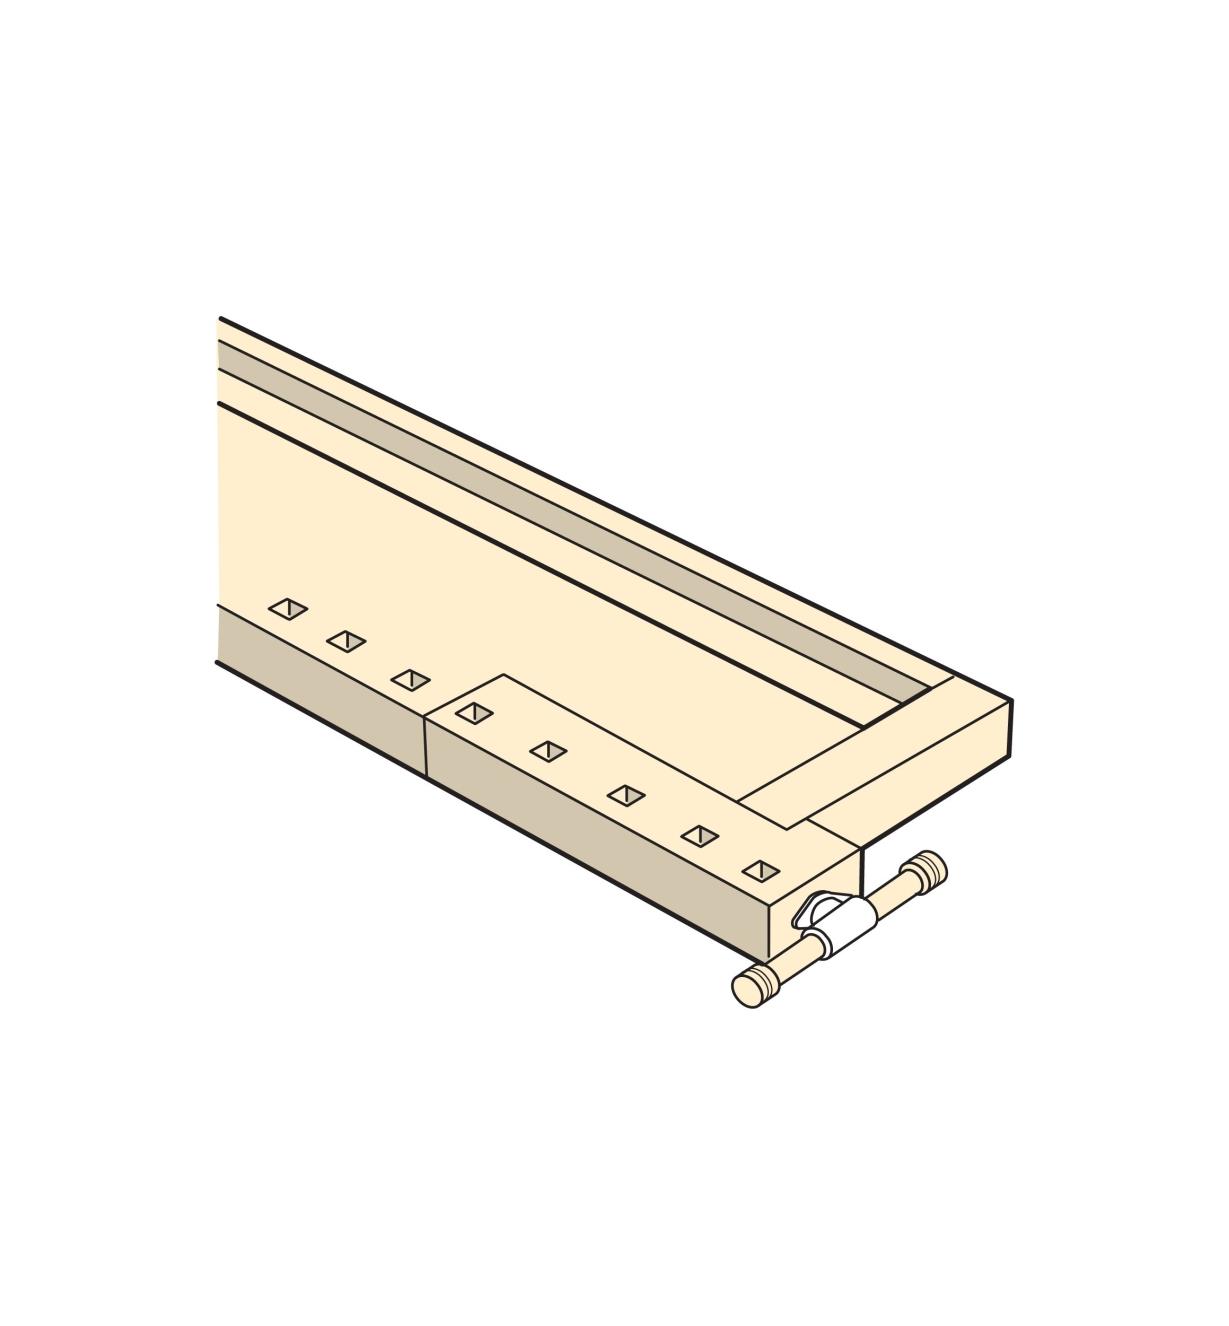 Illustration of Tail Vise installed in a bench